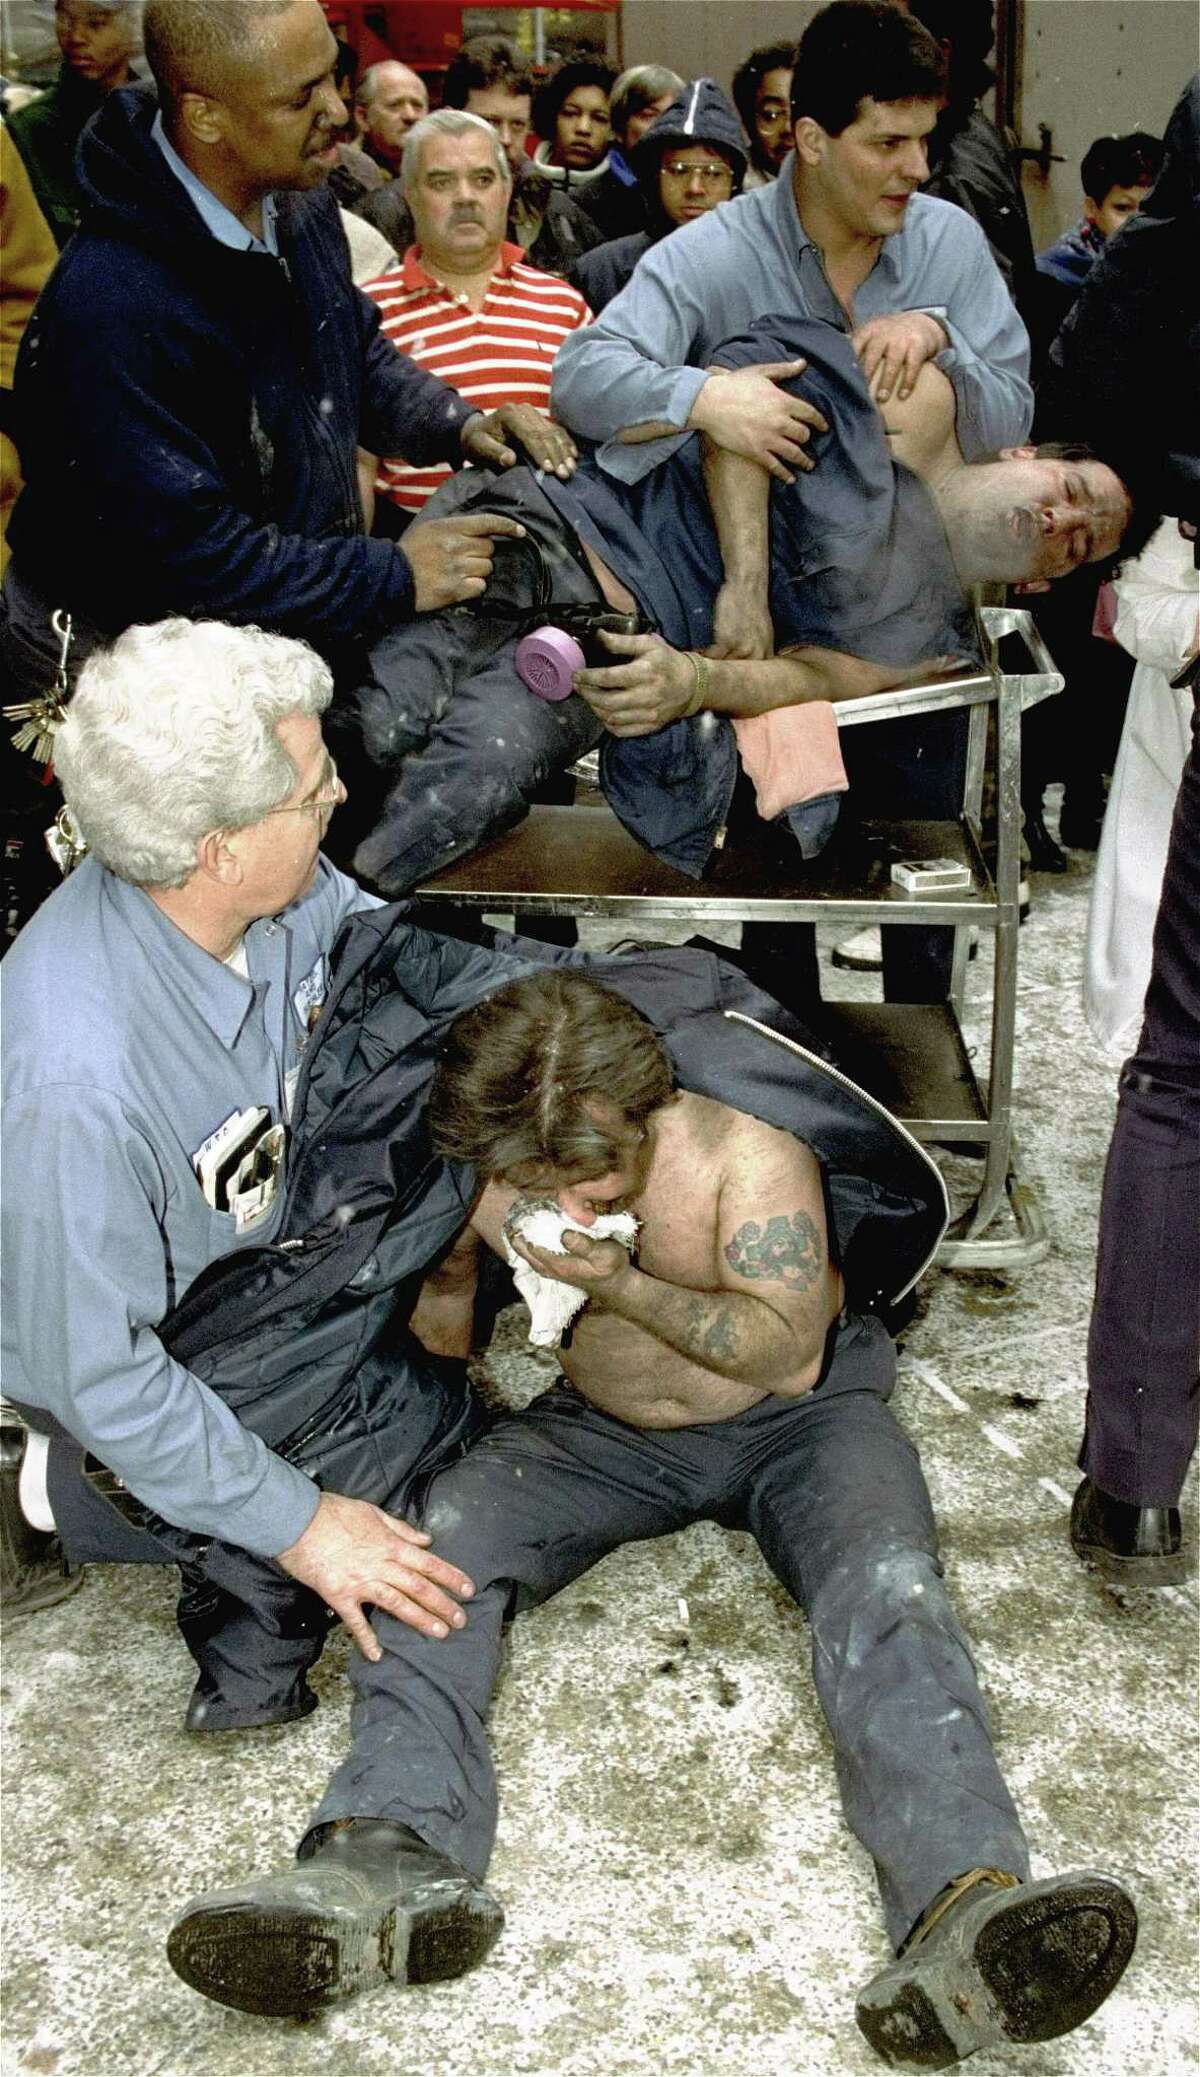 FILE - In this file photo of Feb. 26, 1993, victims of a fire at the World Trade Center in New York are treated at the scene after an explosion rocked the complex. The National September 11 Memorial & Museum on Friday, Jan. 26, 2018, announced the opening of a special installation to commemorate the 25th anniversary of the 1993 truck bombing of the World Trade Center. (AP Photo/Marty Lederhandler, File)